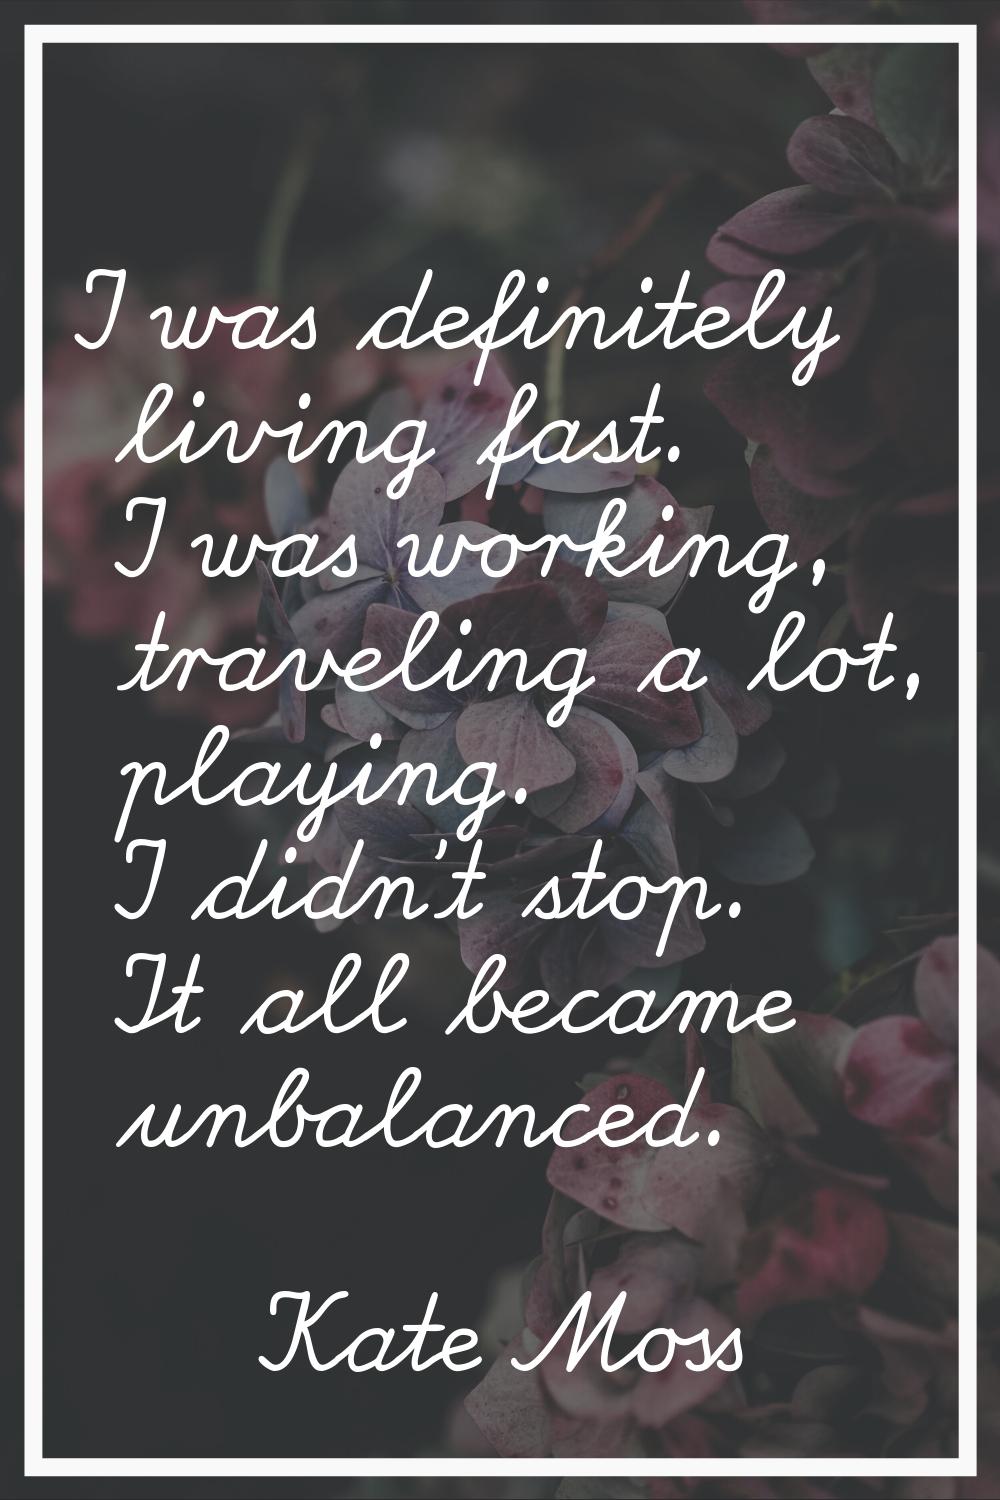 I was definitely living fast. I was working, traveling a lot, playing. I didn't stop. It all became